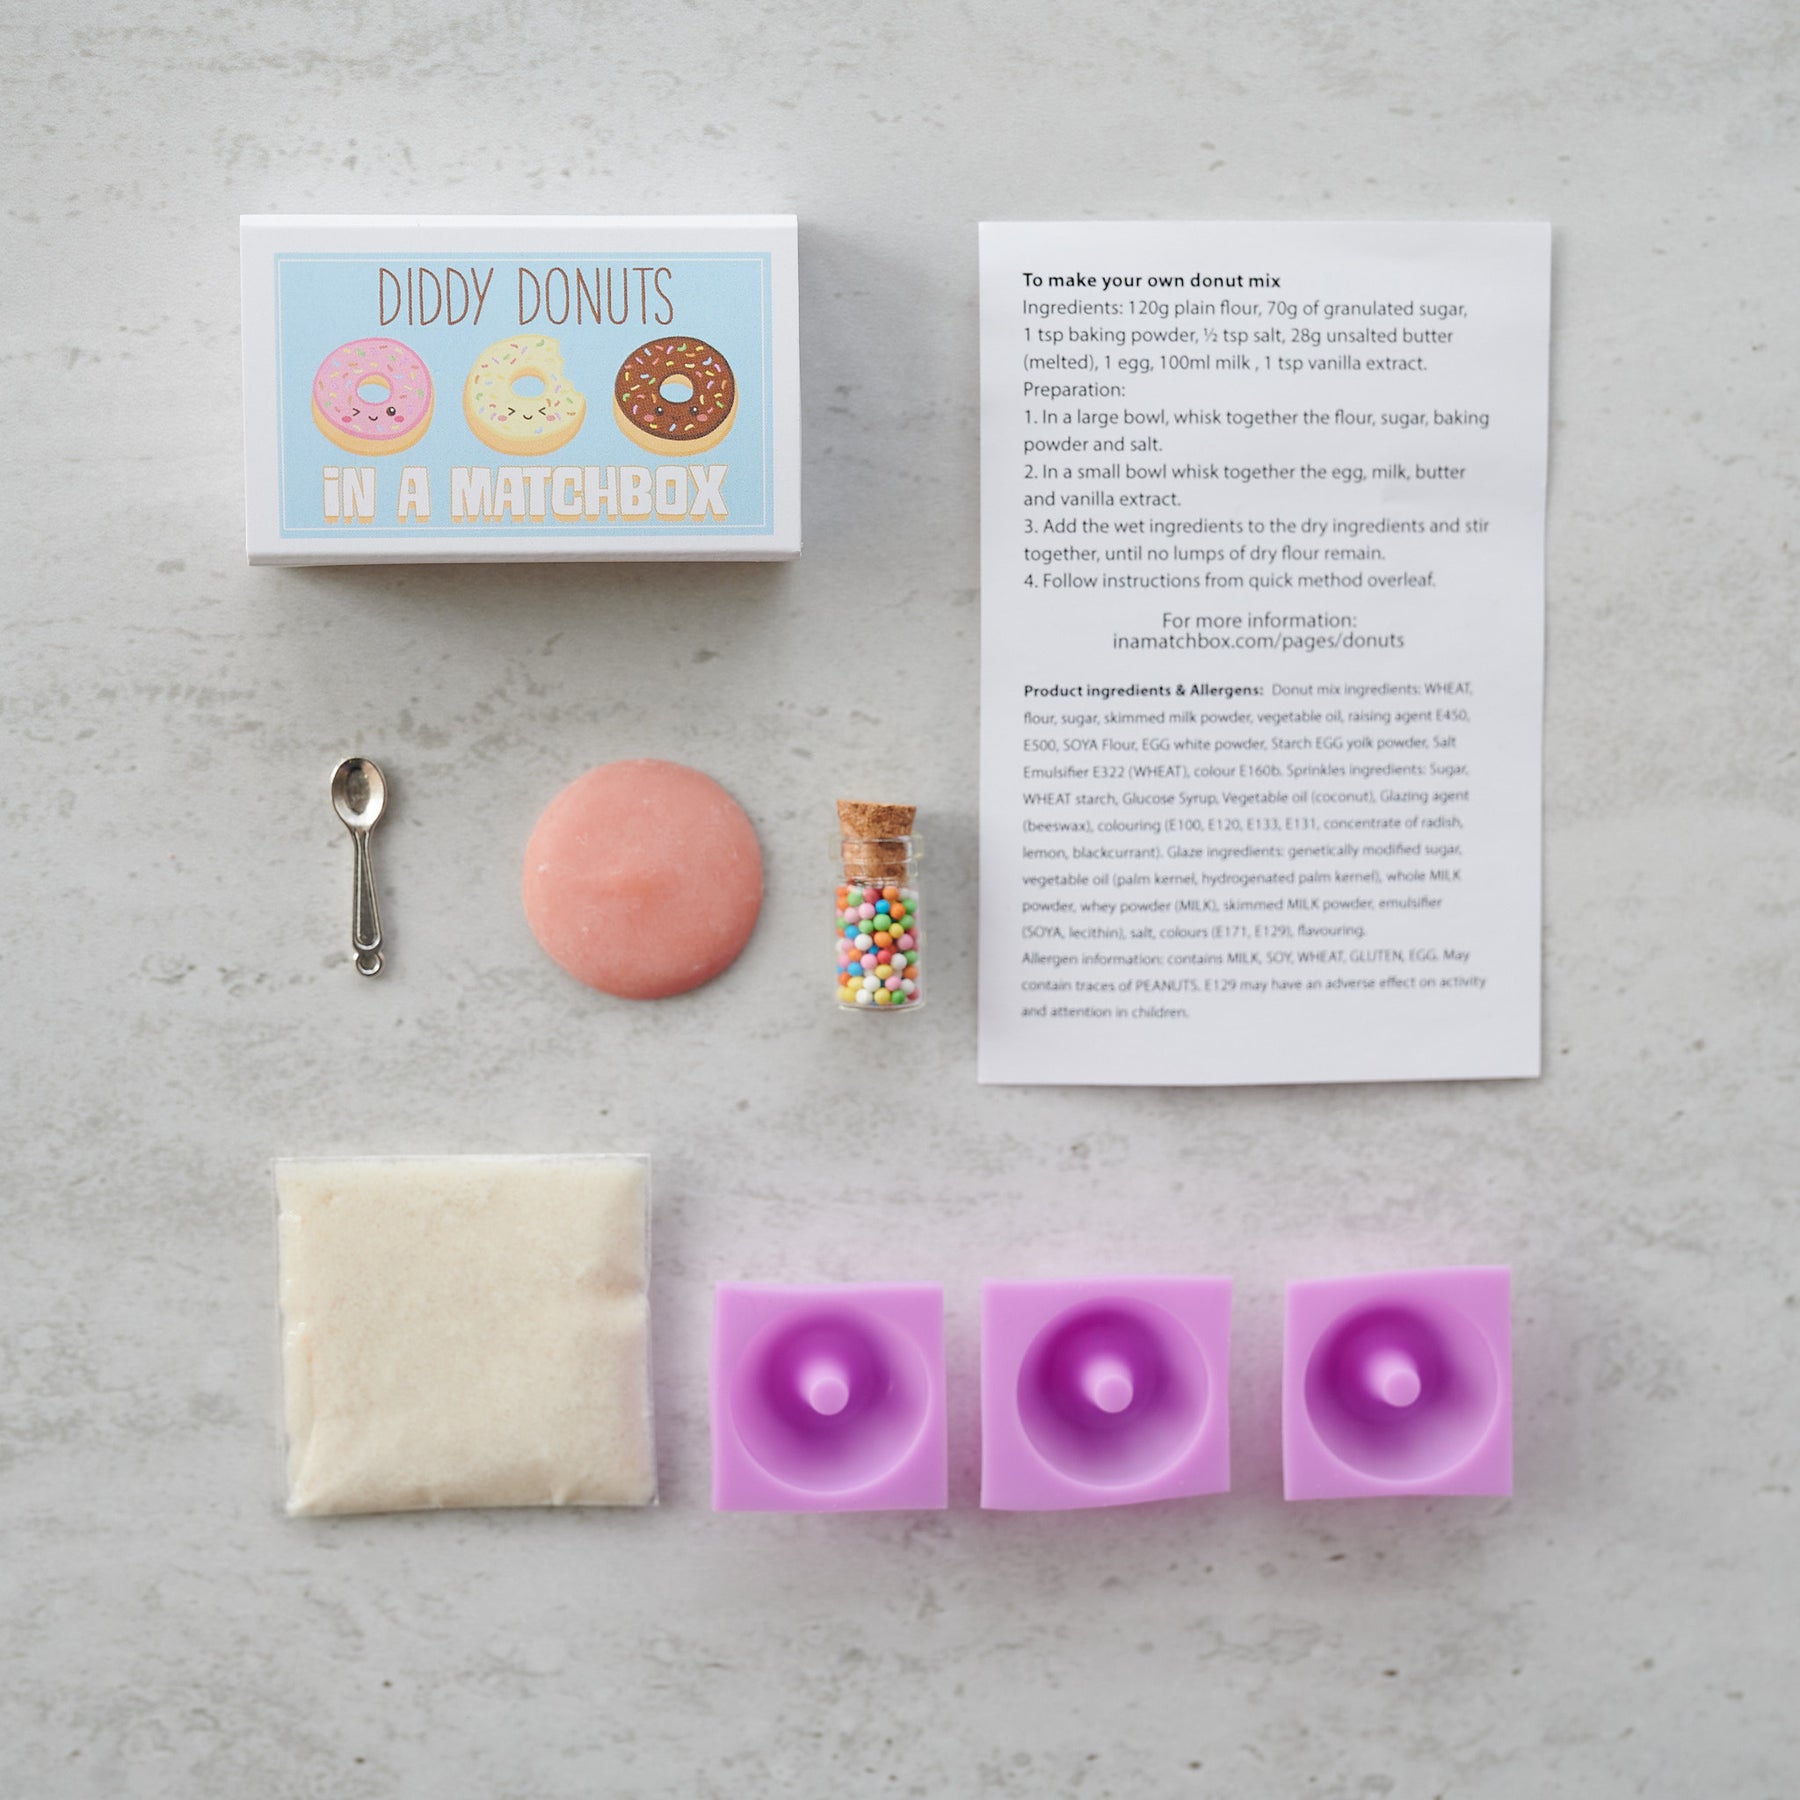 Make Your Own Diddy Donuts In A Matchbox